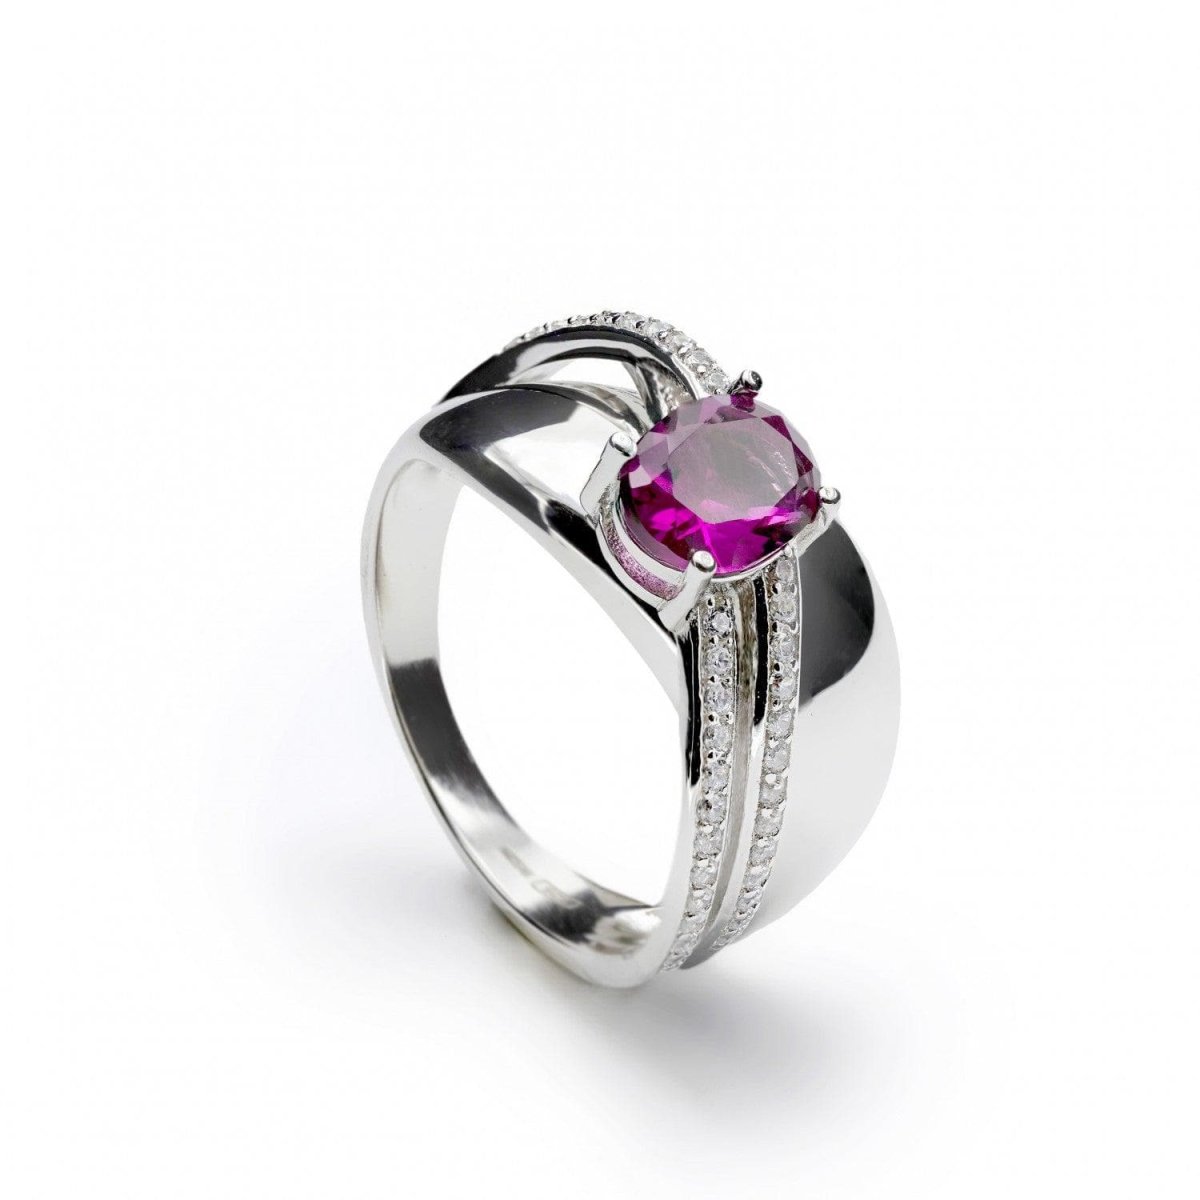 Ring - Big rings with carriles design fuchsia central motif